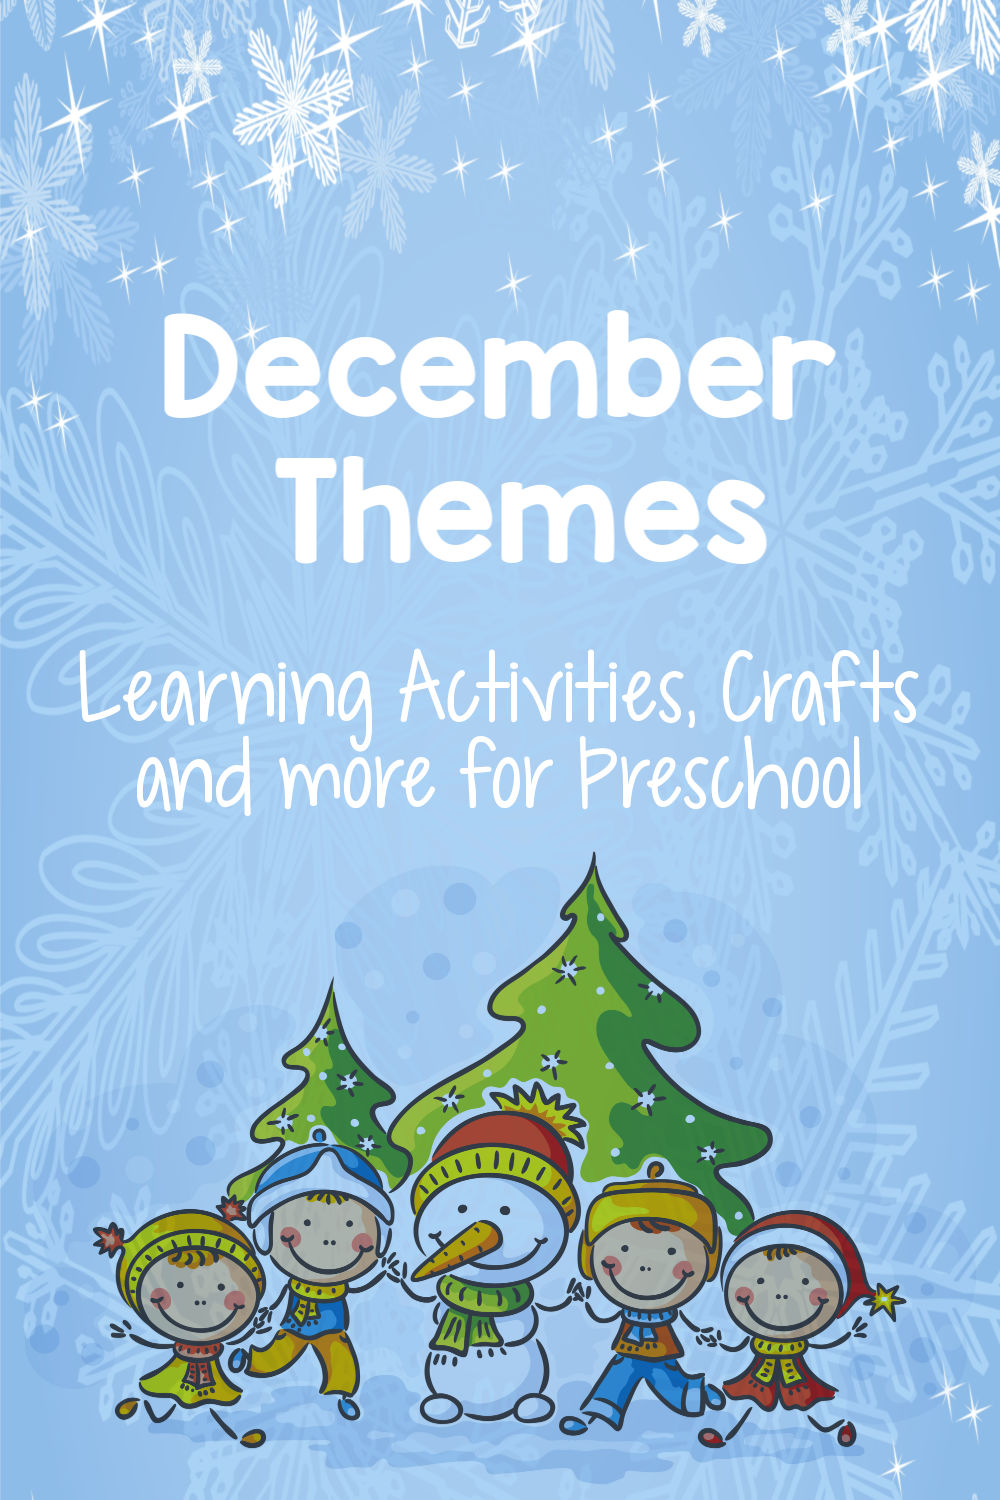 Everything you need for preschool this December! Themes including hands-on activities, crafts, ideas, lesson plans, and more! #preschool #preschoolthemes #december #decembertheme #crafts #preschoolart #preschoolactivities